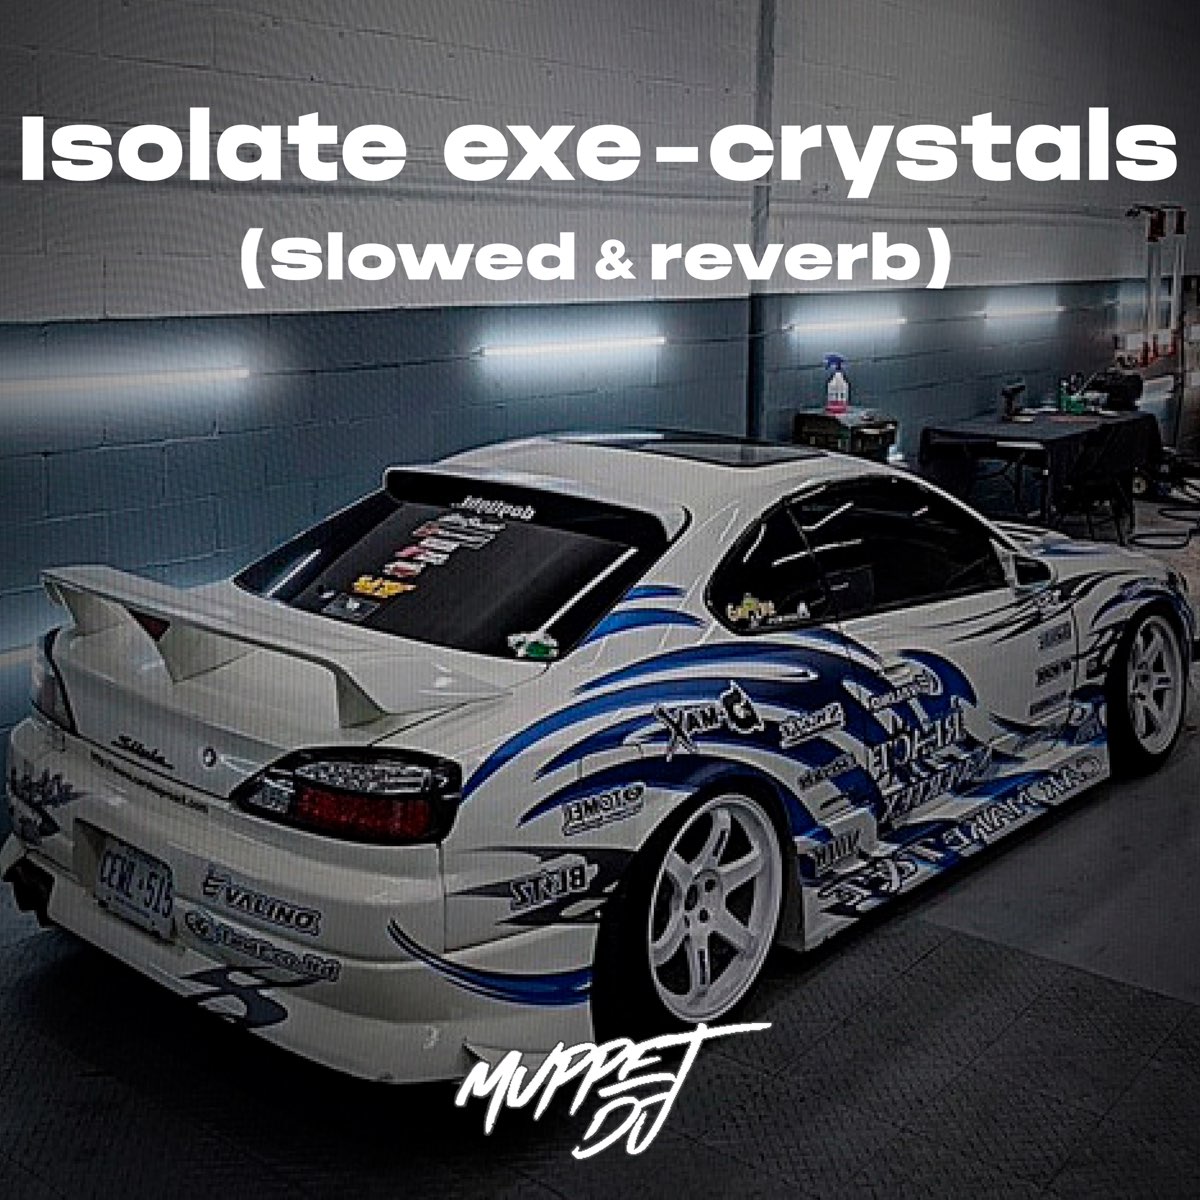 Crystal exe slowed reverb. Crystals isolate.exe. Isolate exe. Isolate.exe - Crystals (Slowed € Reverb). Crystal exe.